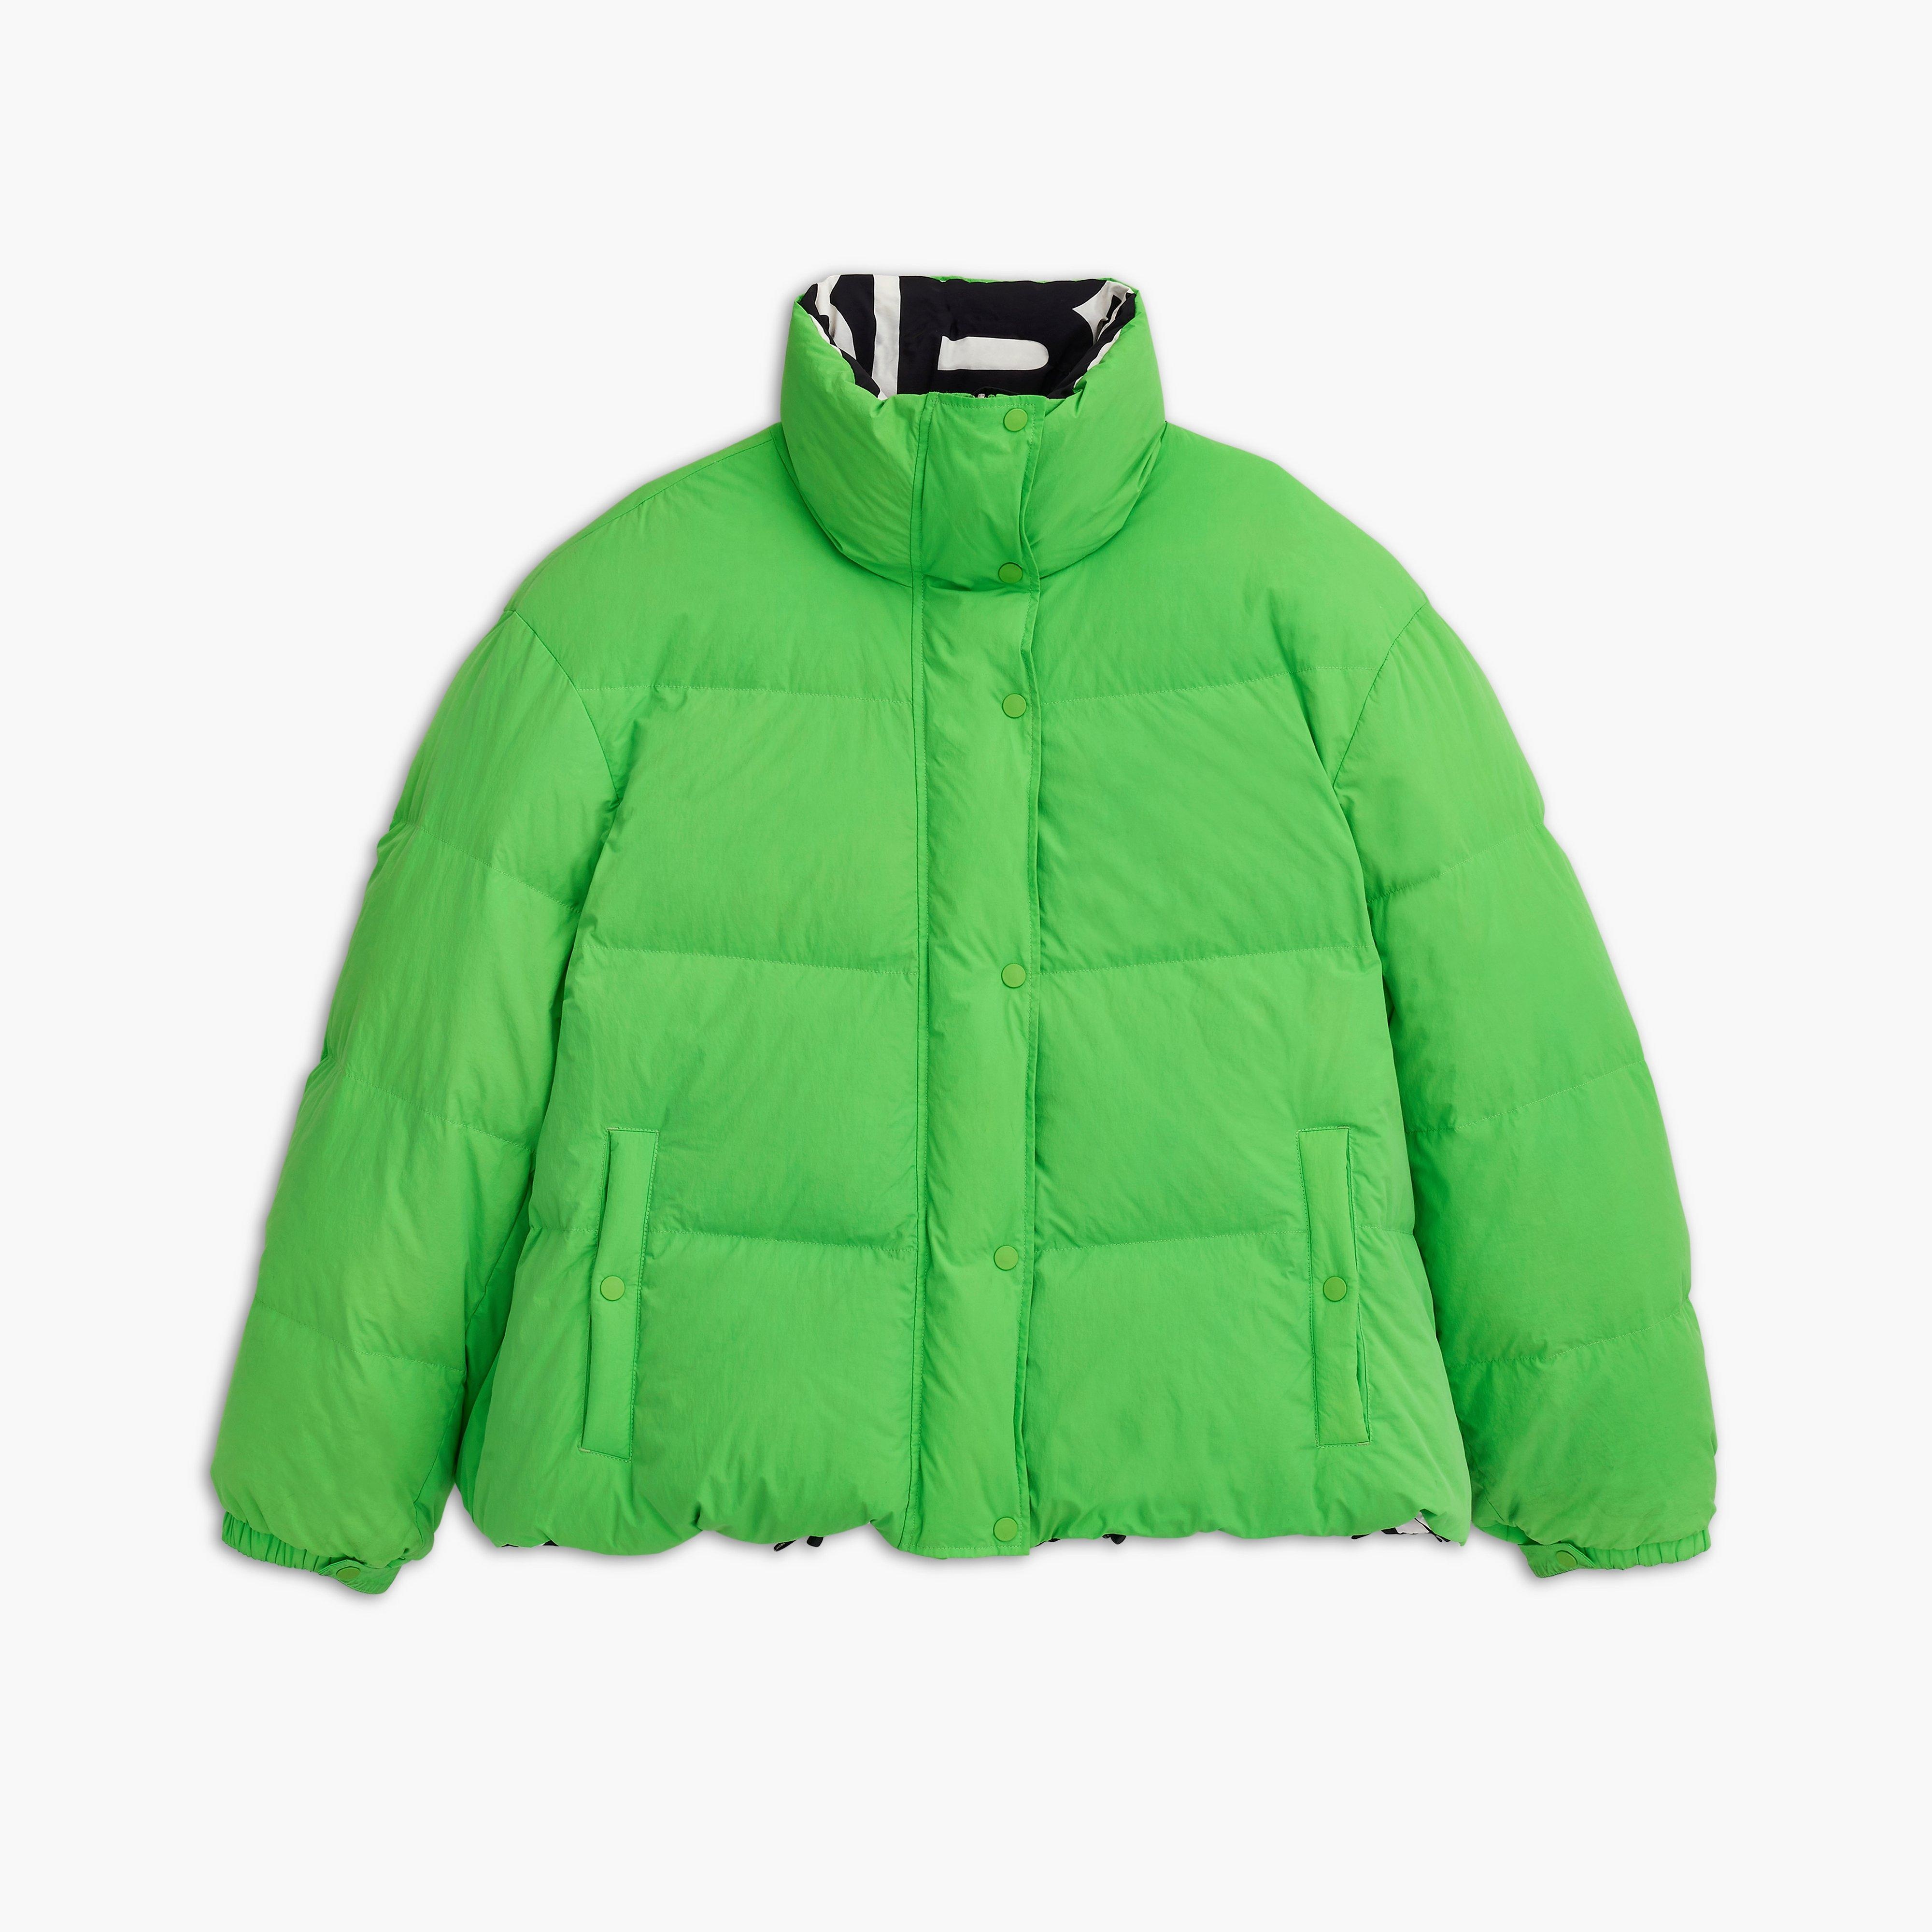 THE REVERSIBLE PUFFER - 1